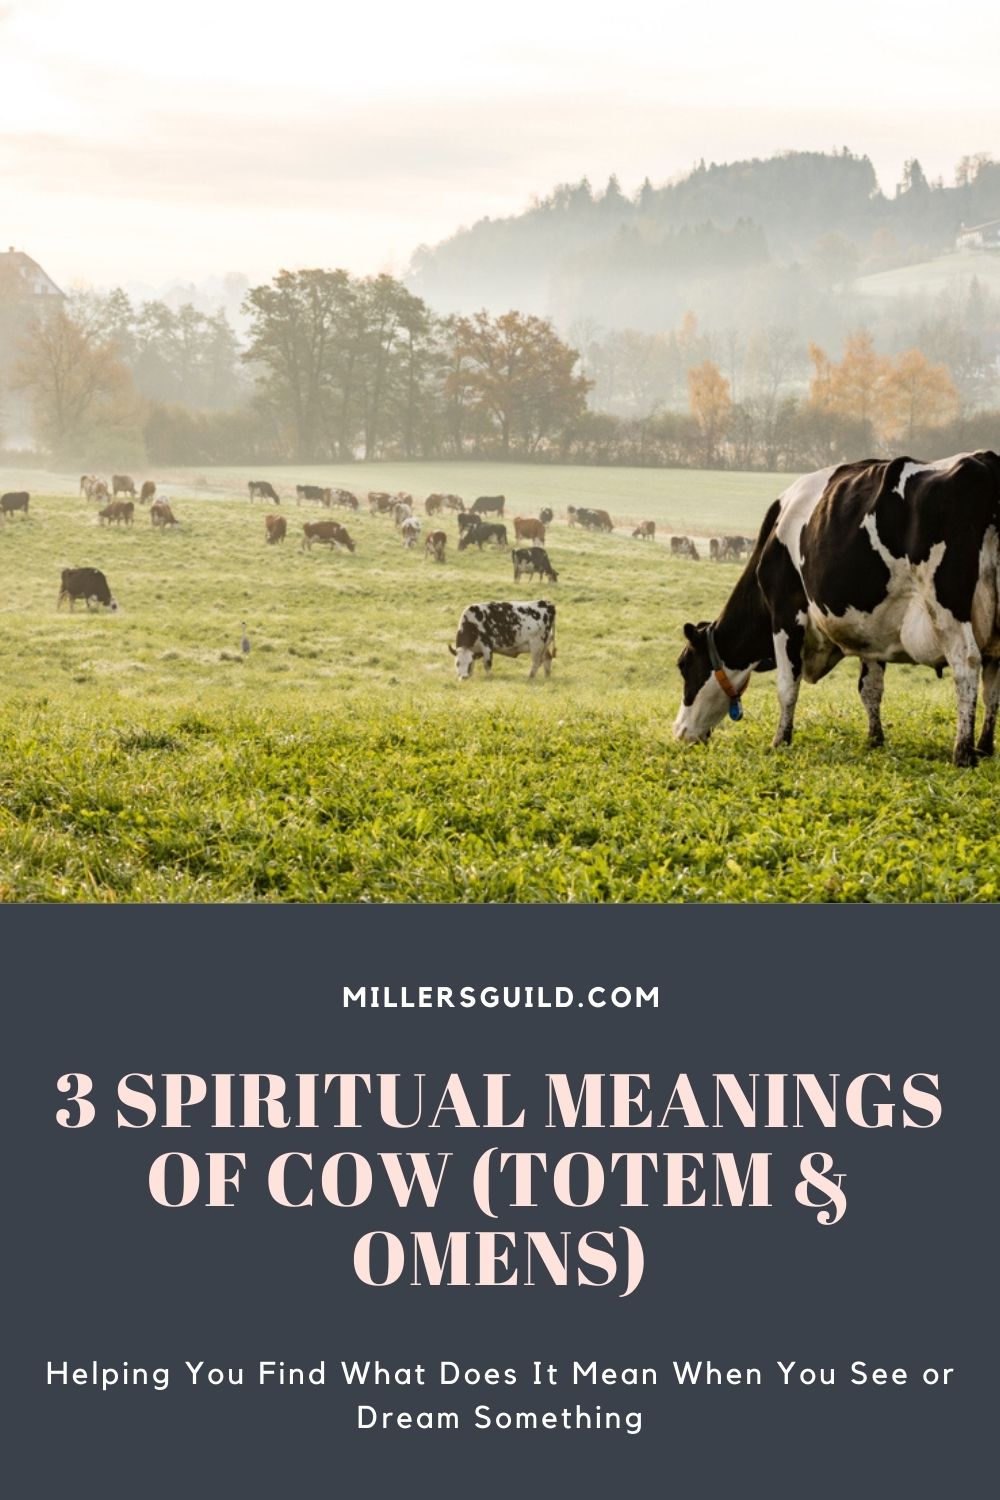 3 Spiritual Meanings of Cow (Totem & Omens) 2